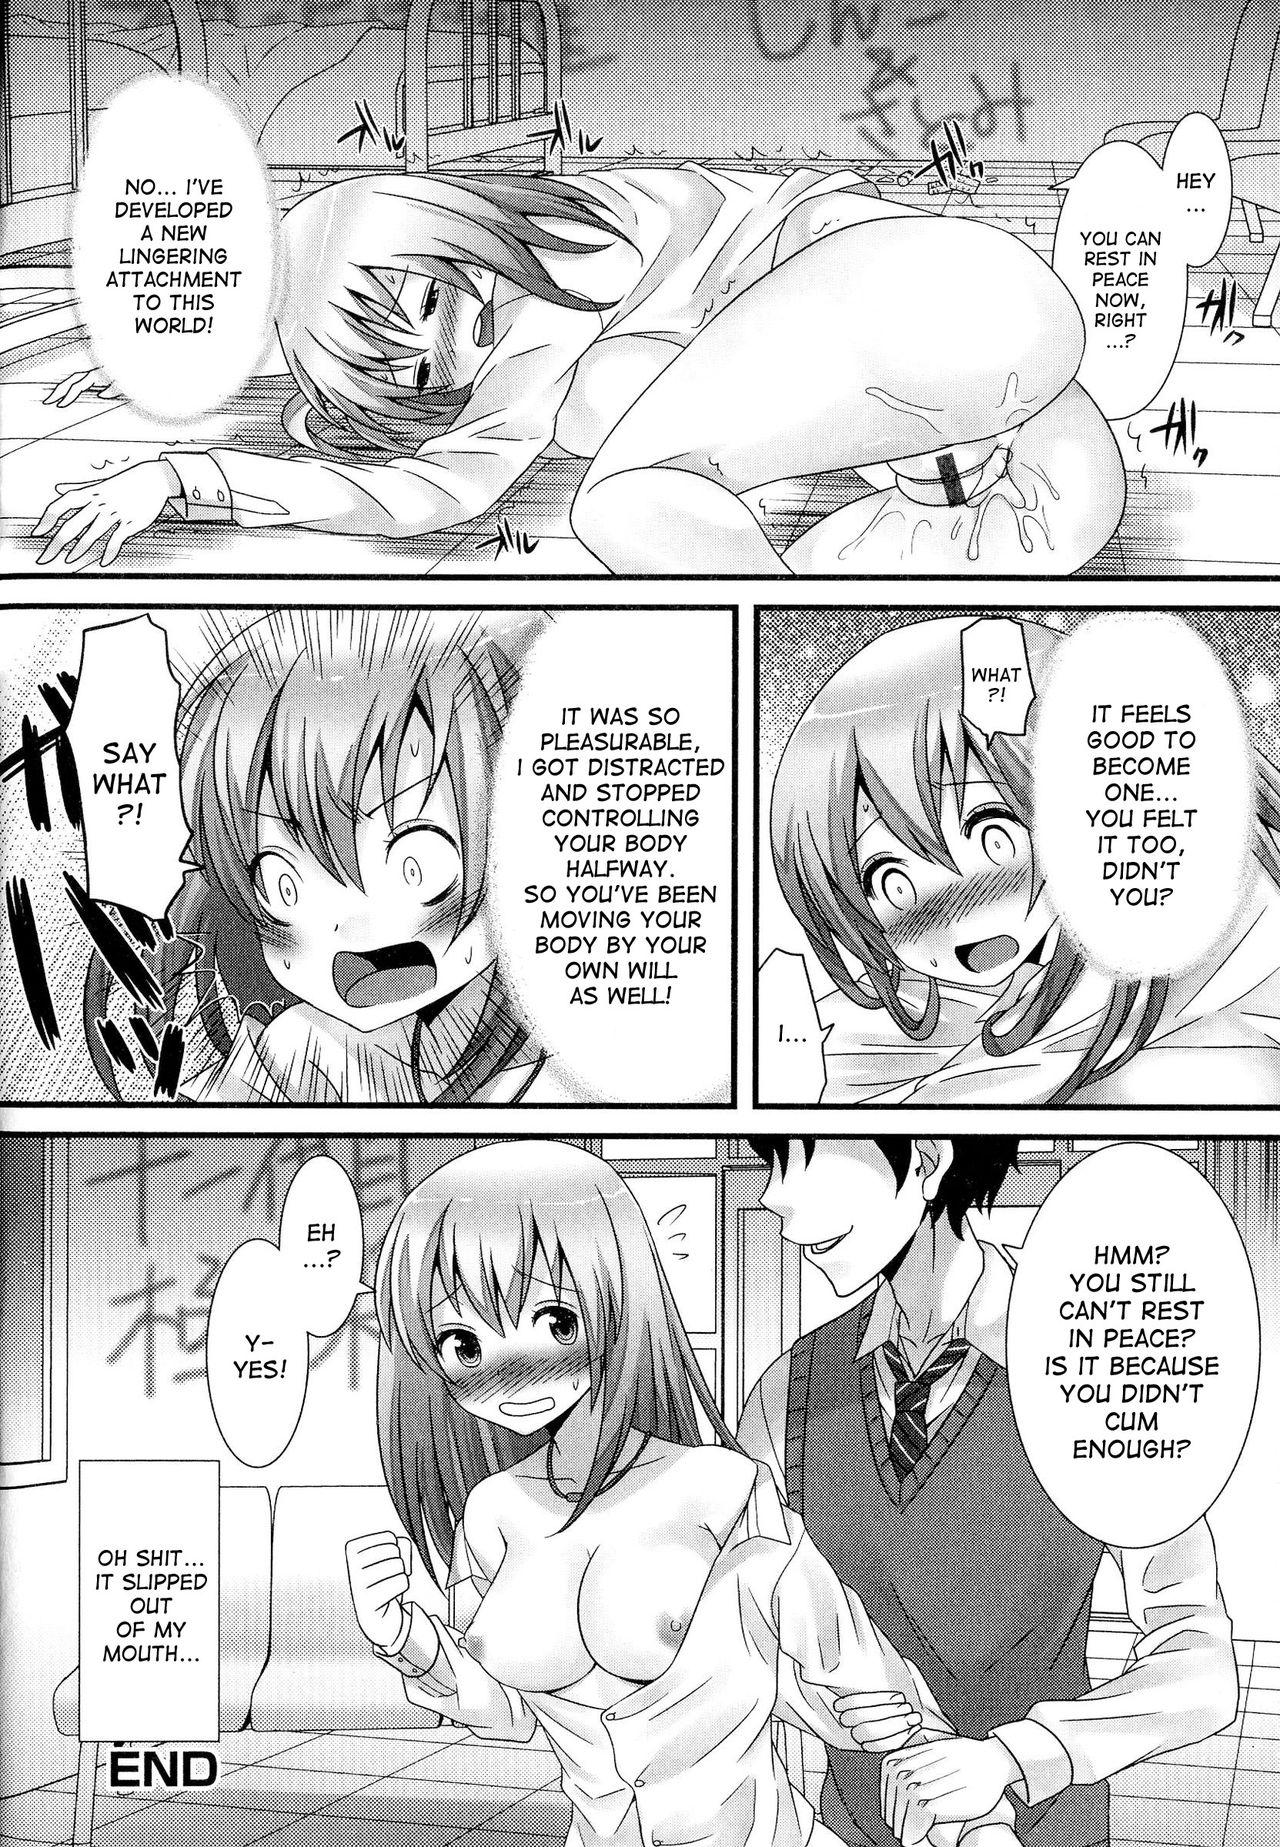 Nasty Koibito wa Yuurei!? | My Lover is a Ghost?! Thylinh - Page 16